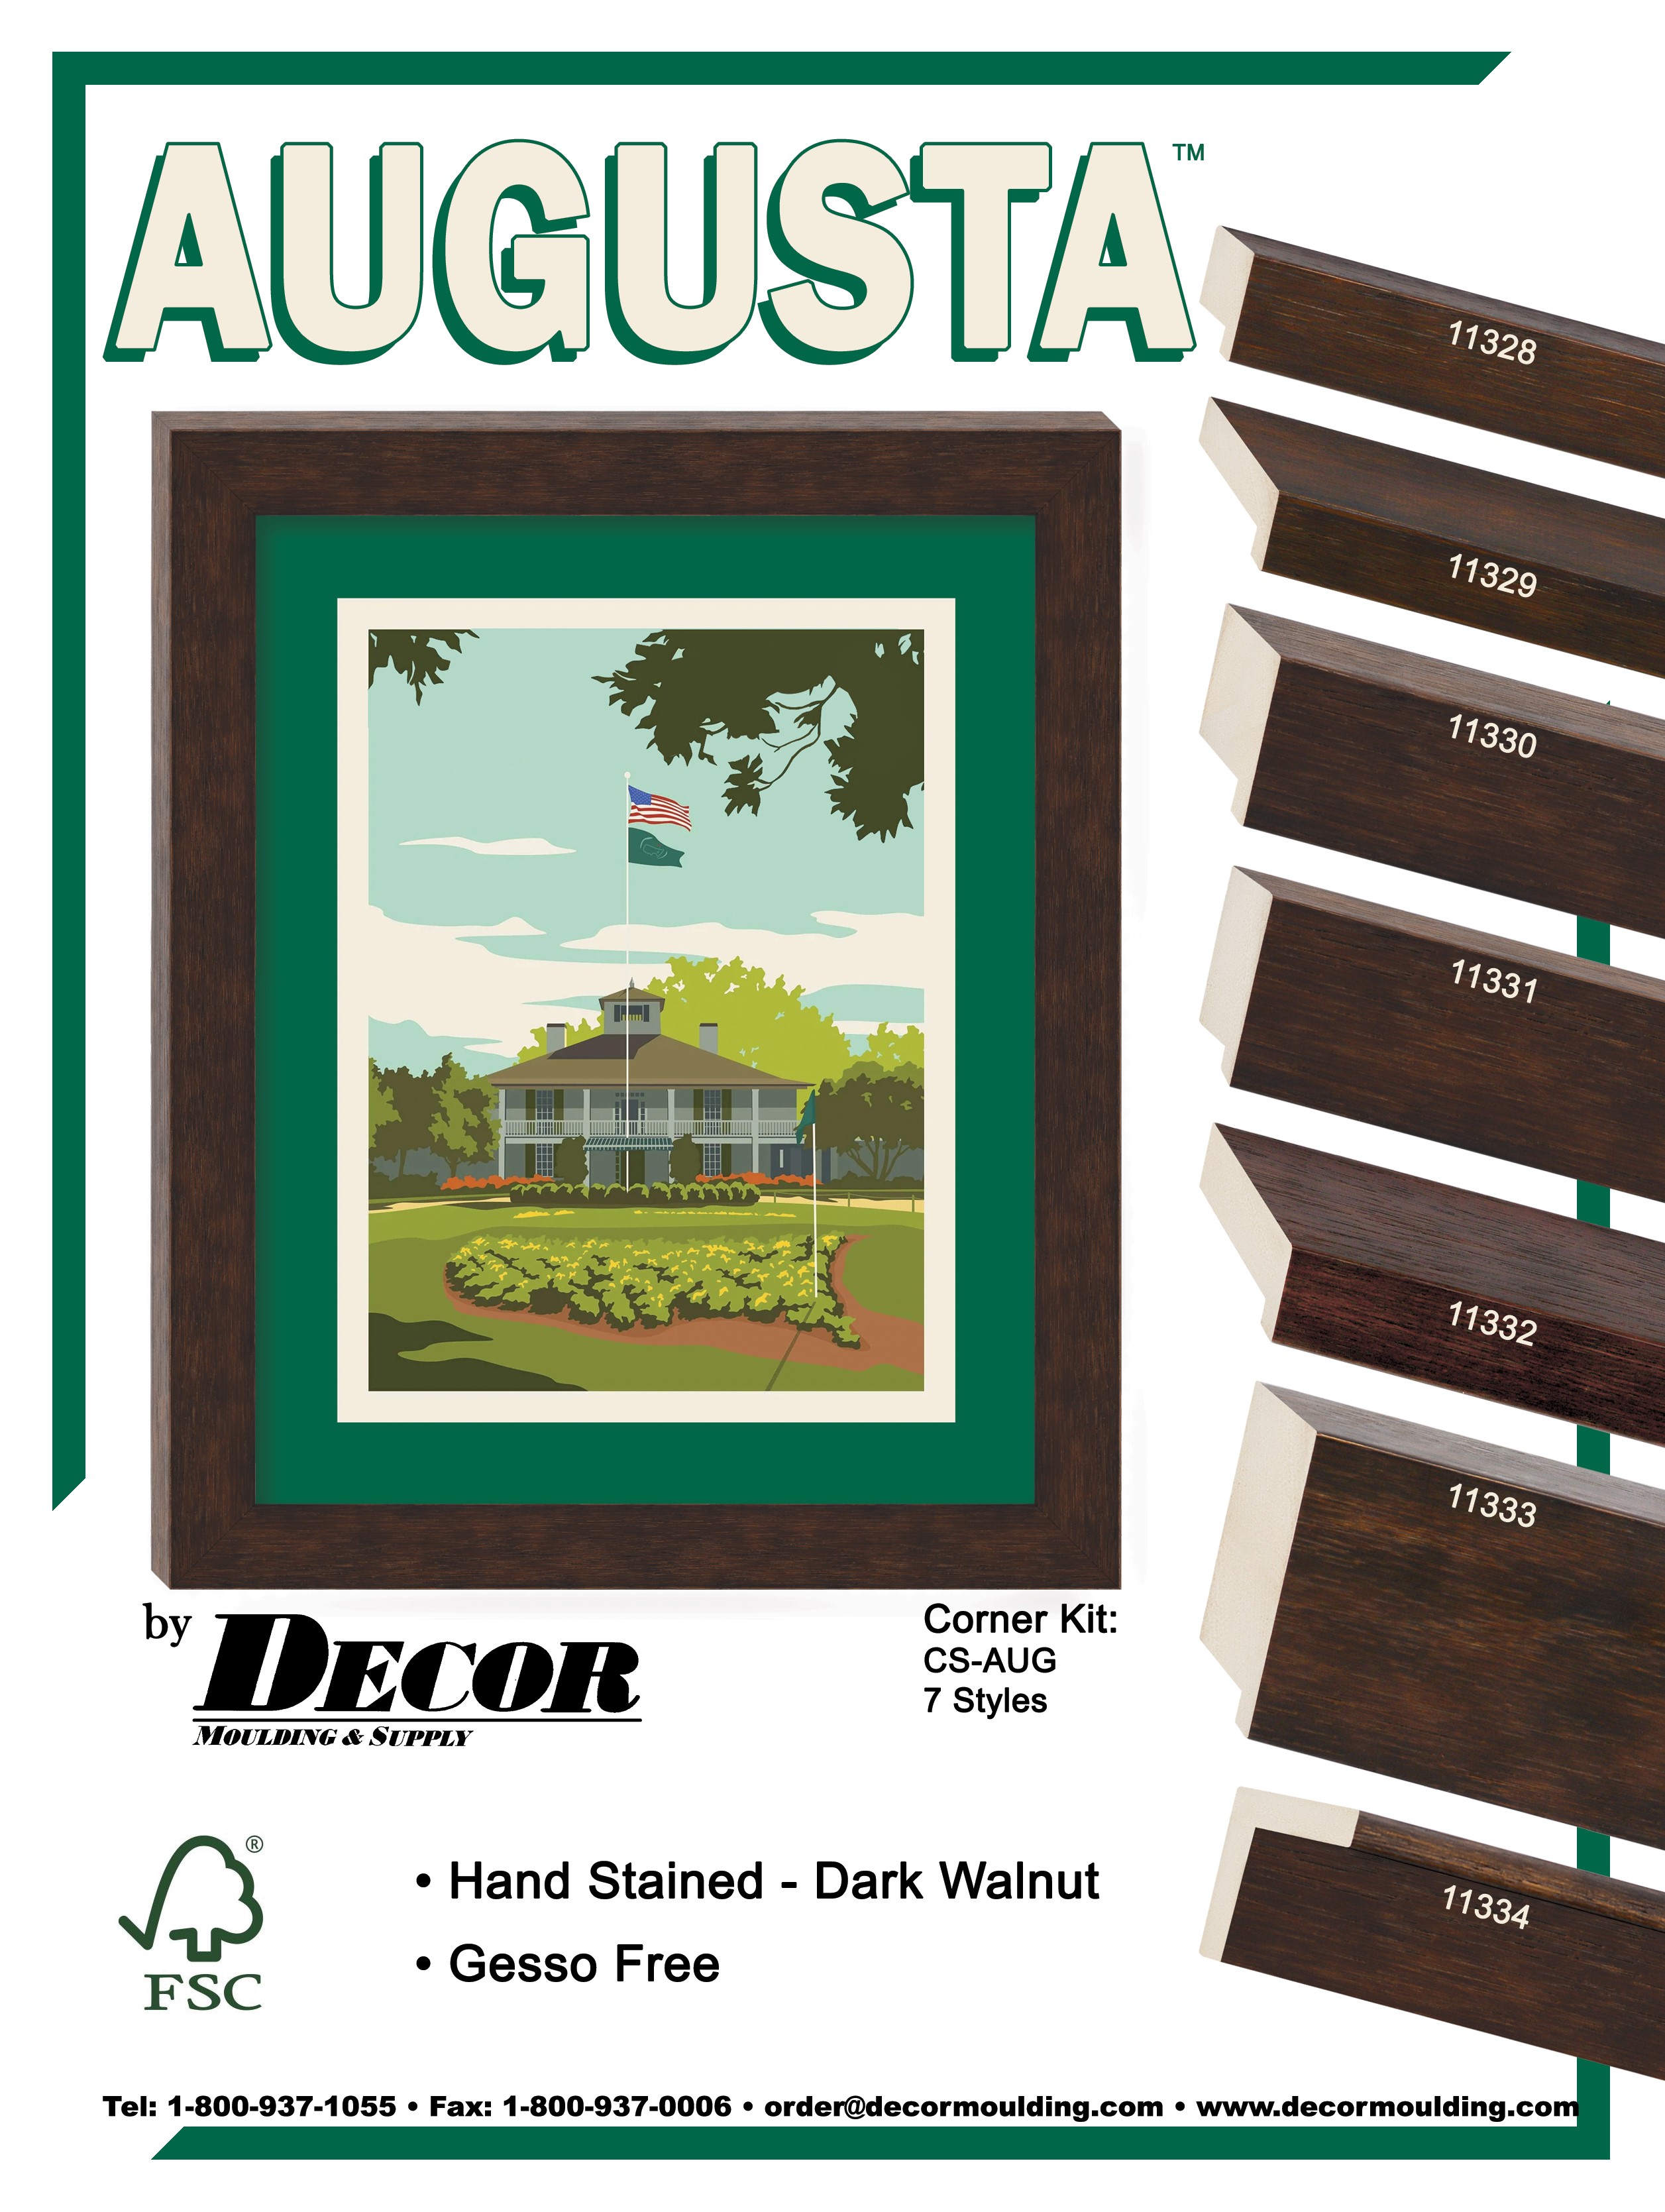 Augusta Collection Image